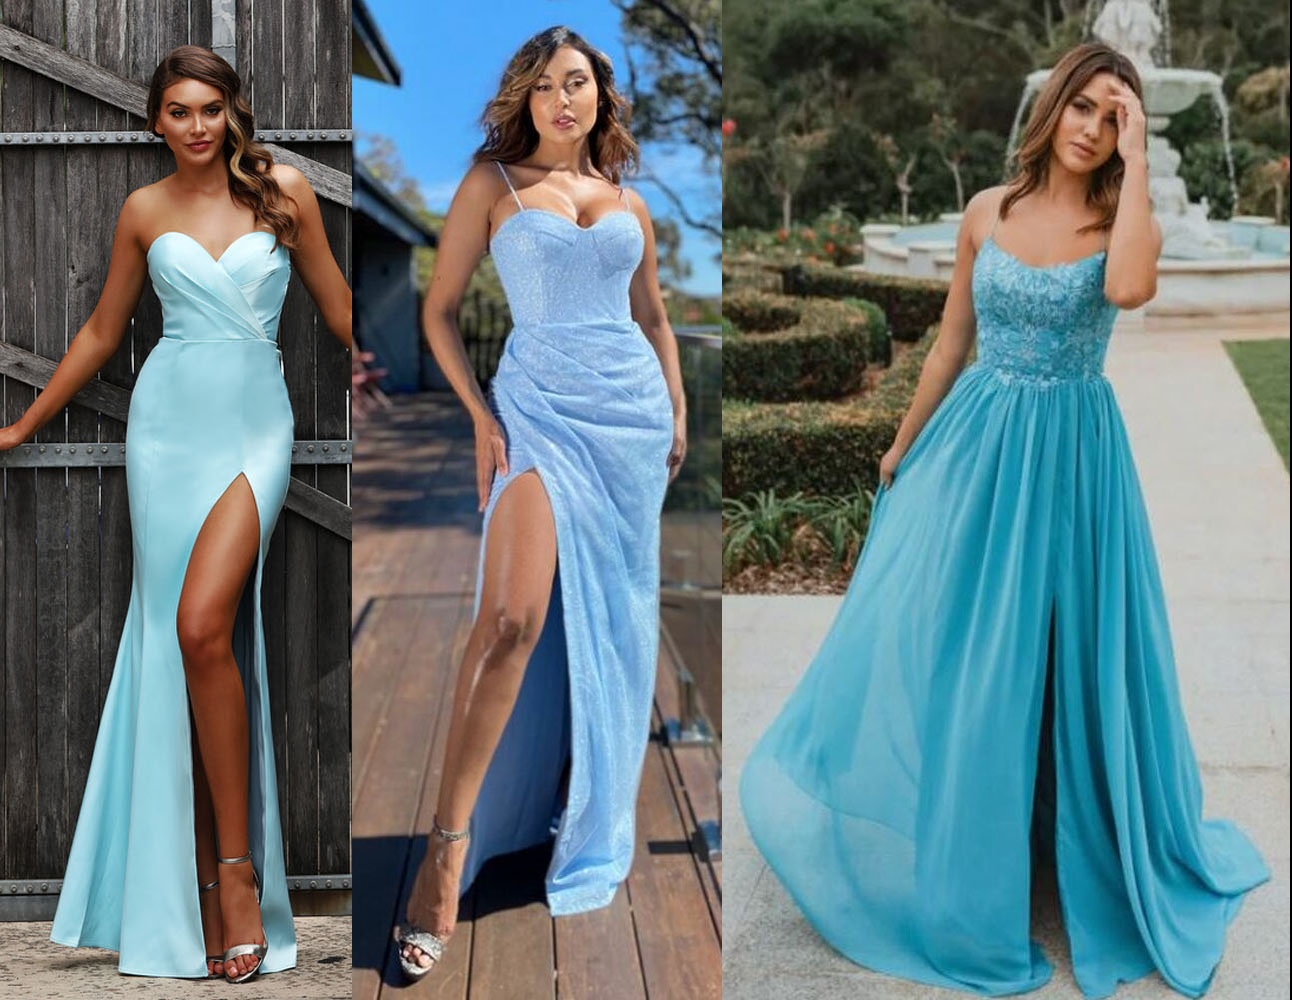 Light Blue Formal Dresses Online Australia at Fashionably Yours Bridal & Evening Store